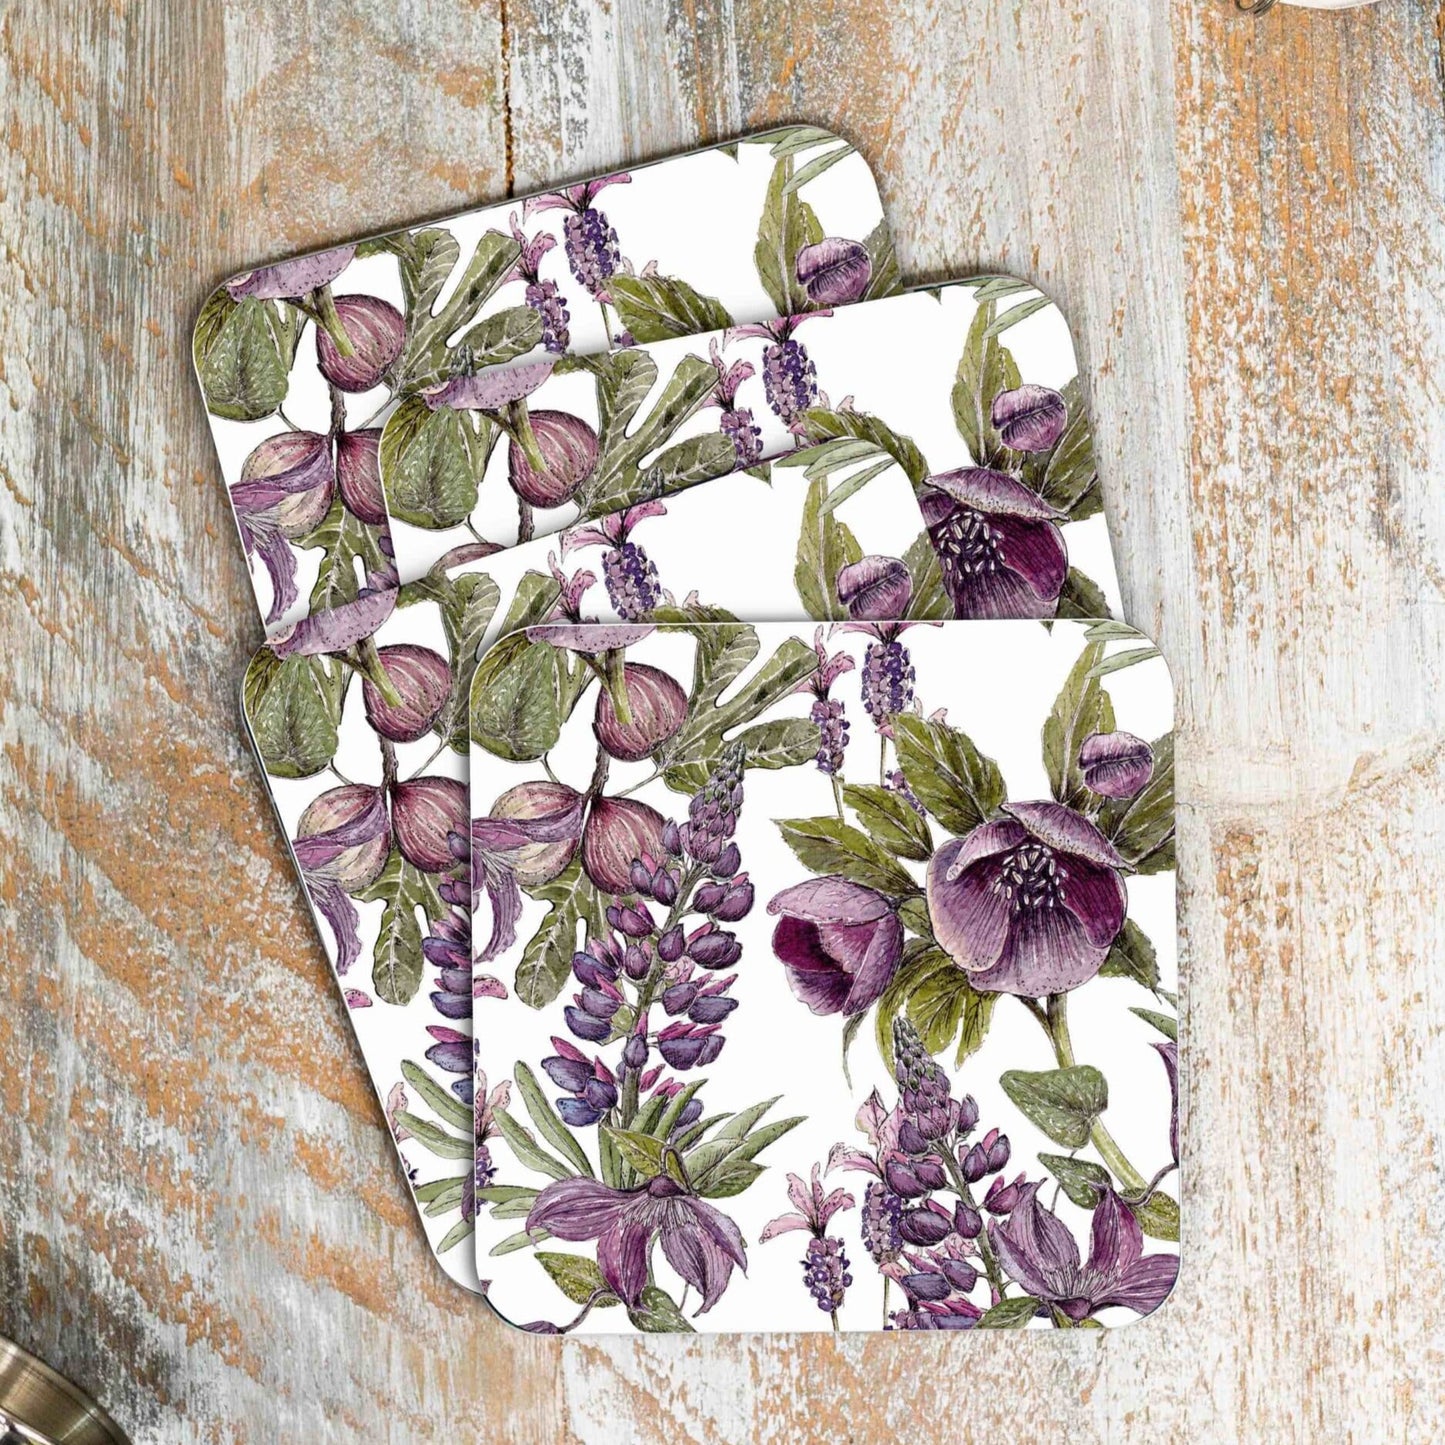 Load image into Gallery viewer, Stack of 4 coasters with purple and black floral design.  Photographed against wooden surface.
